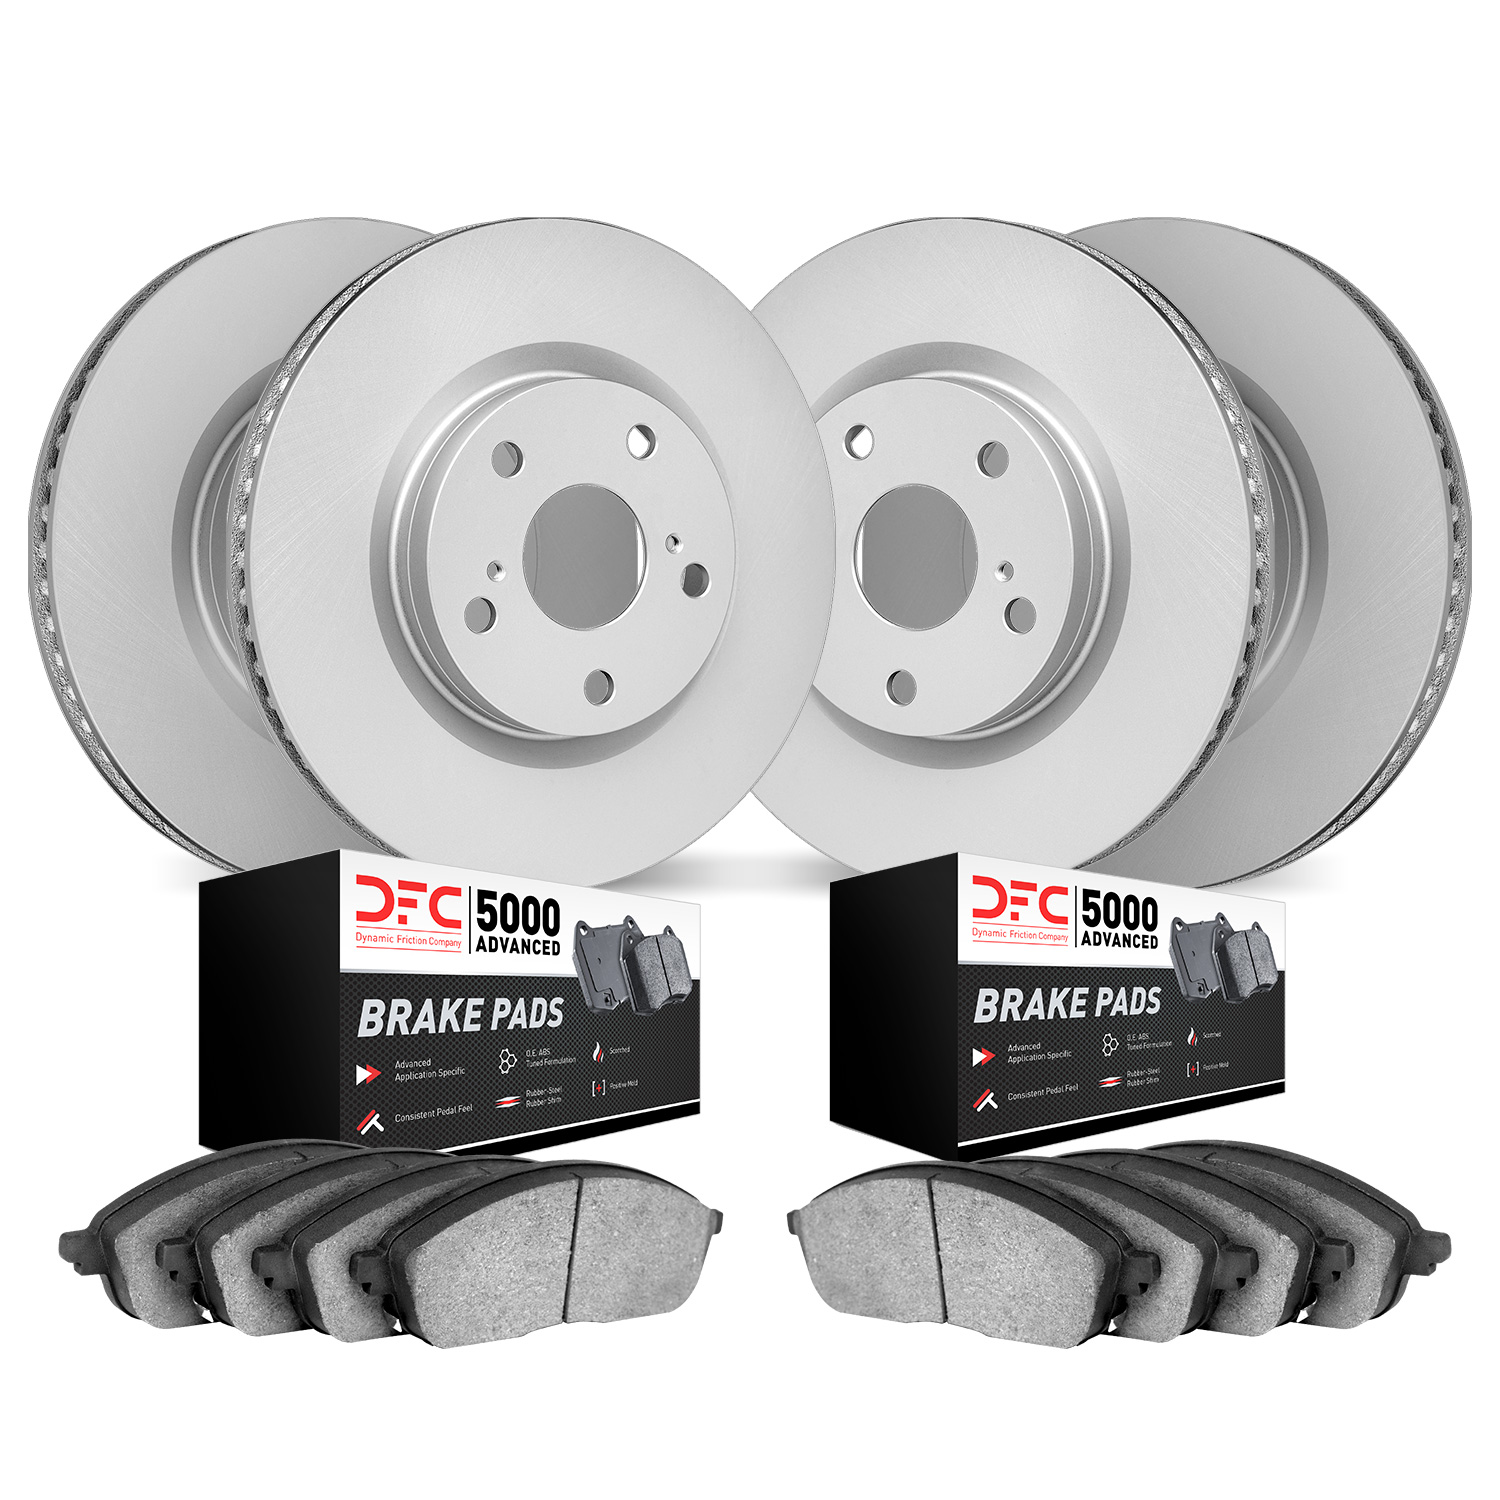 4504-75024 Geospec Brake Rotors w/5000 Advanced Brake Pads Kit, Fits Select Lexus/Toyota/Scion, Position: Front and Rear